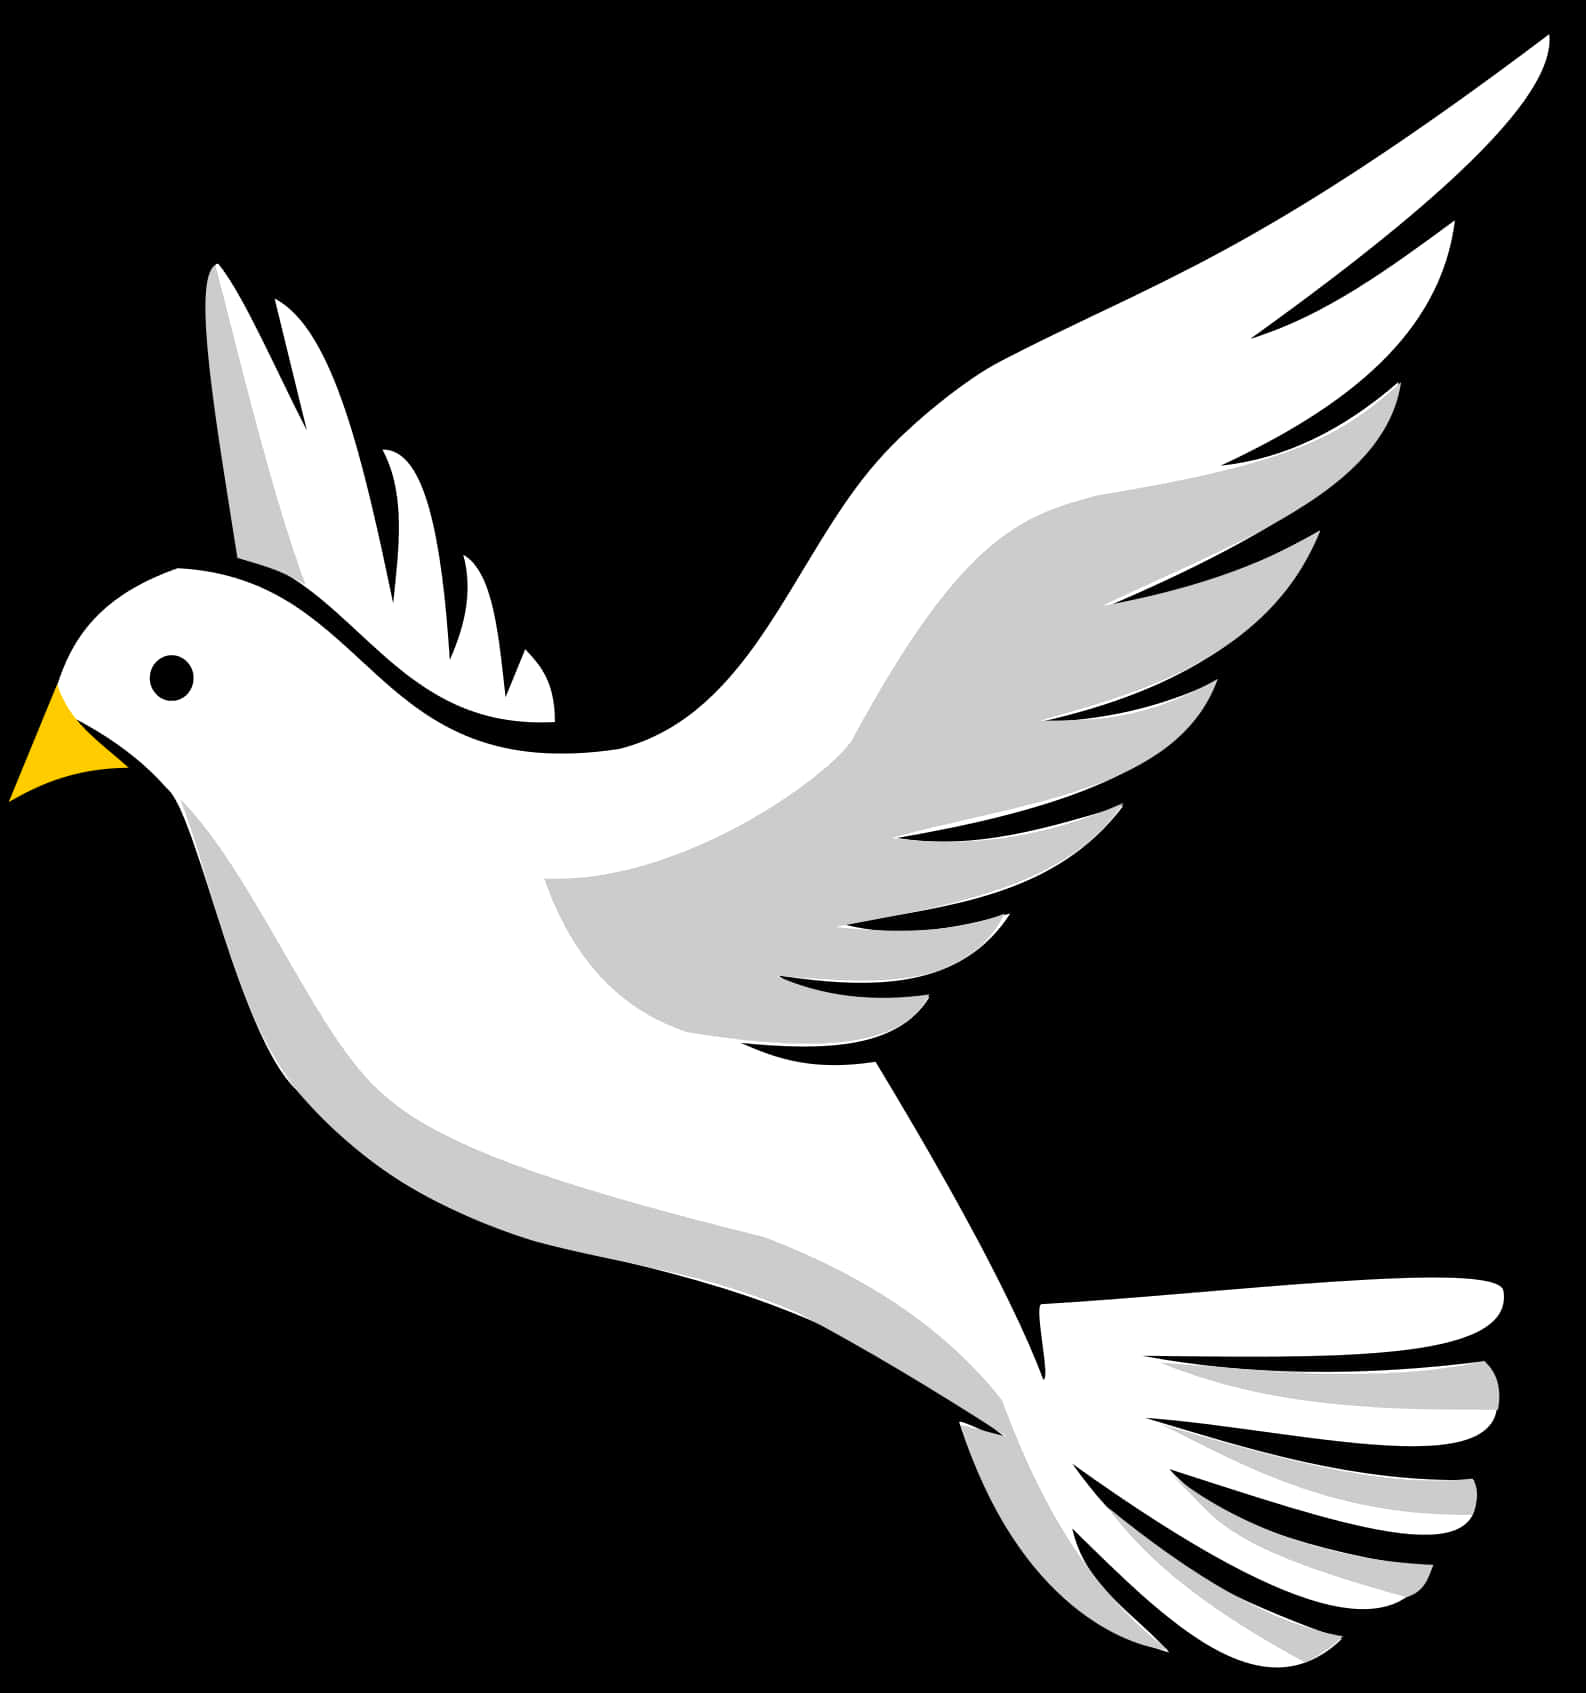 A White Bird With Yellow Beak And Wings